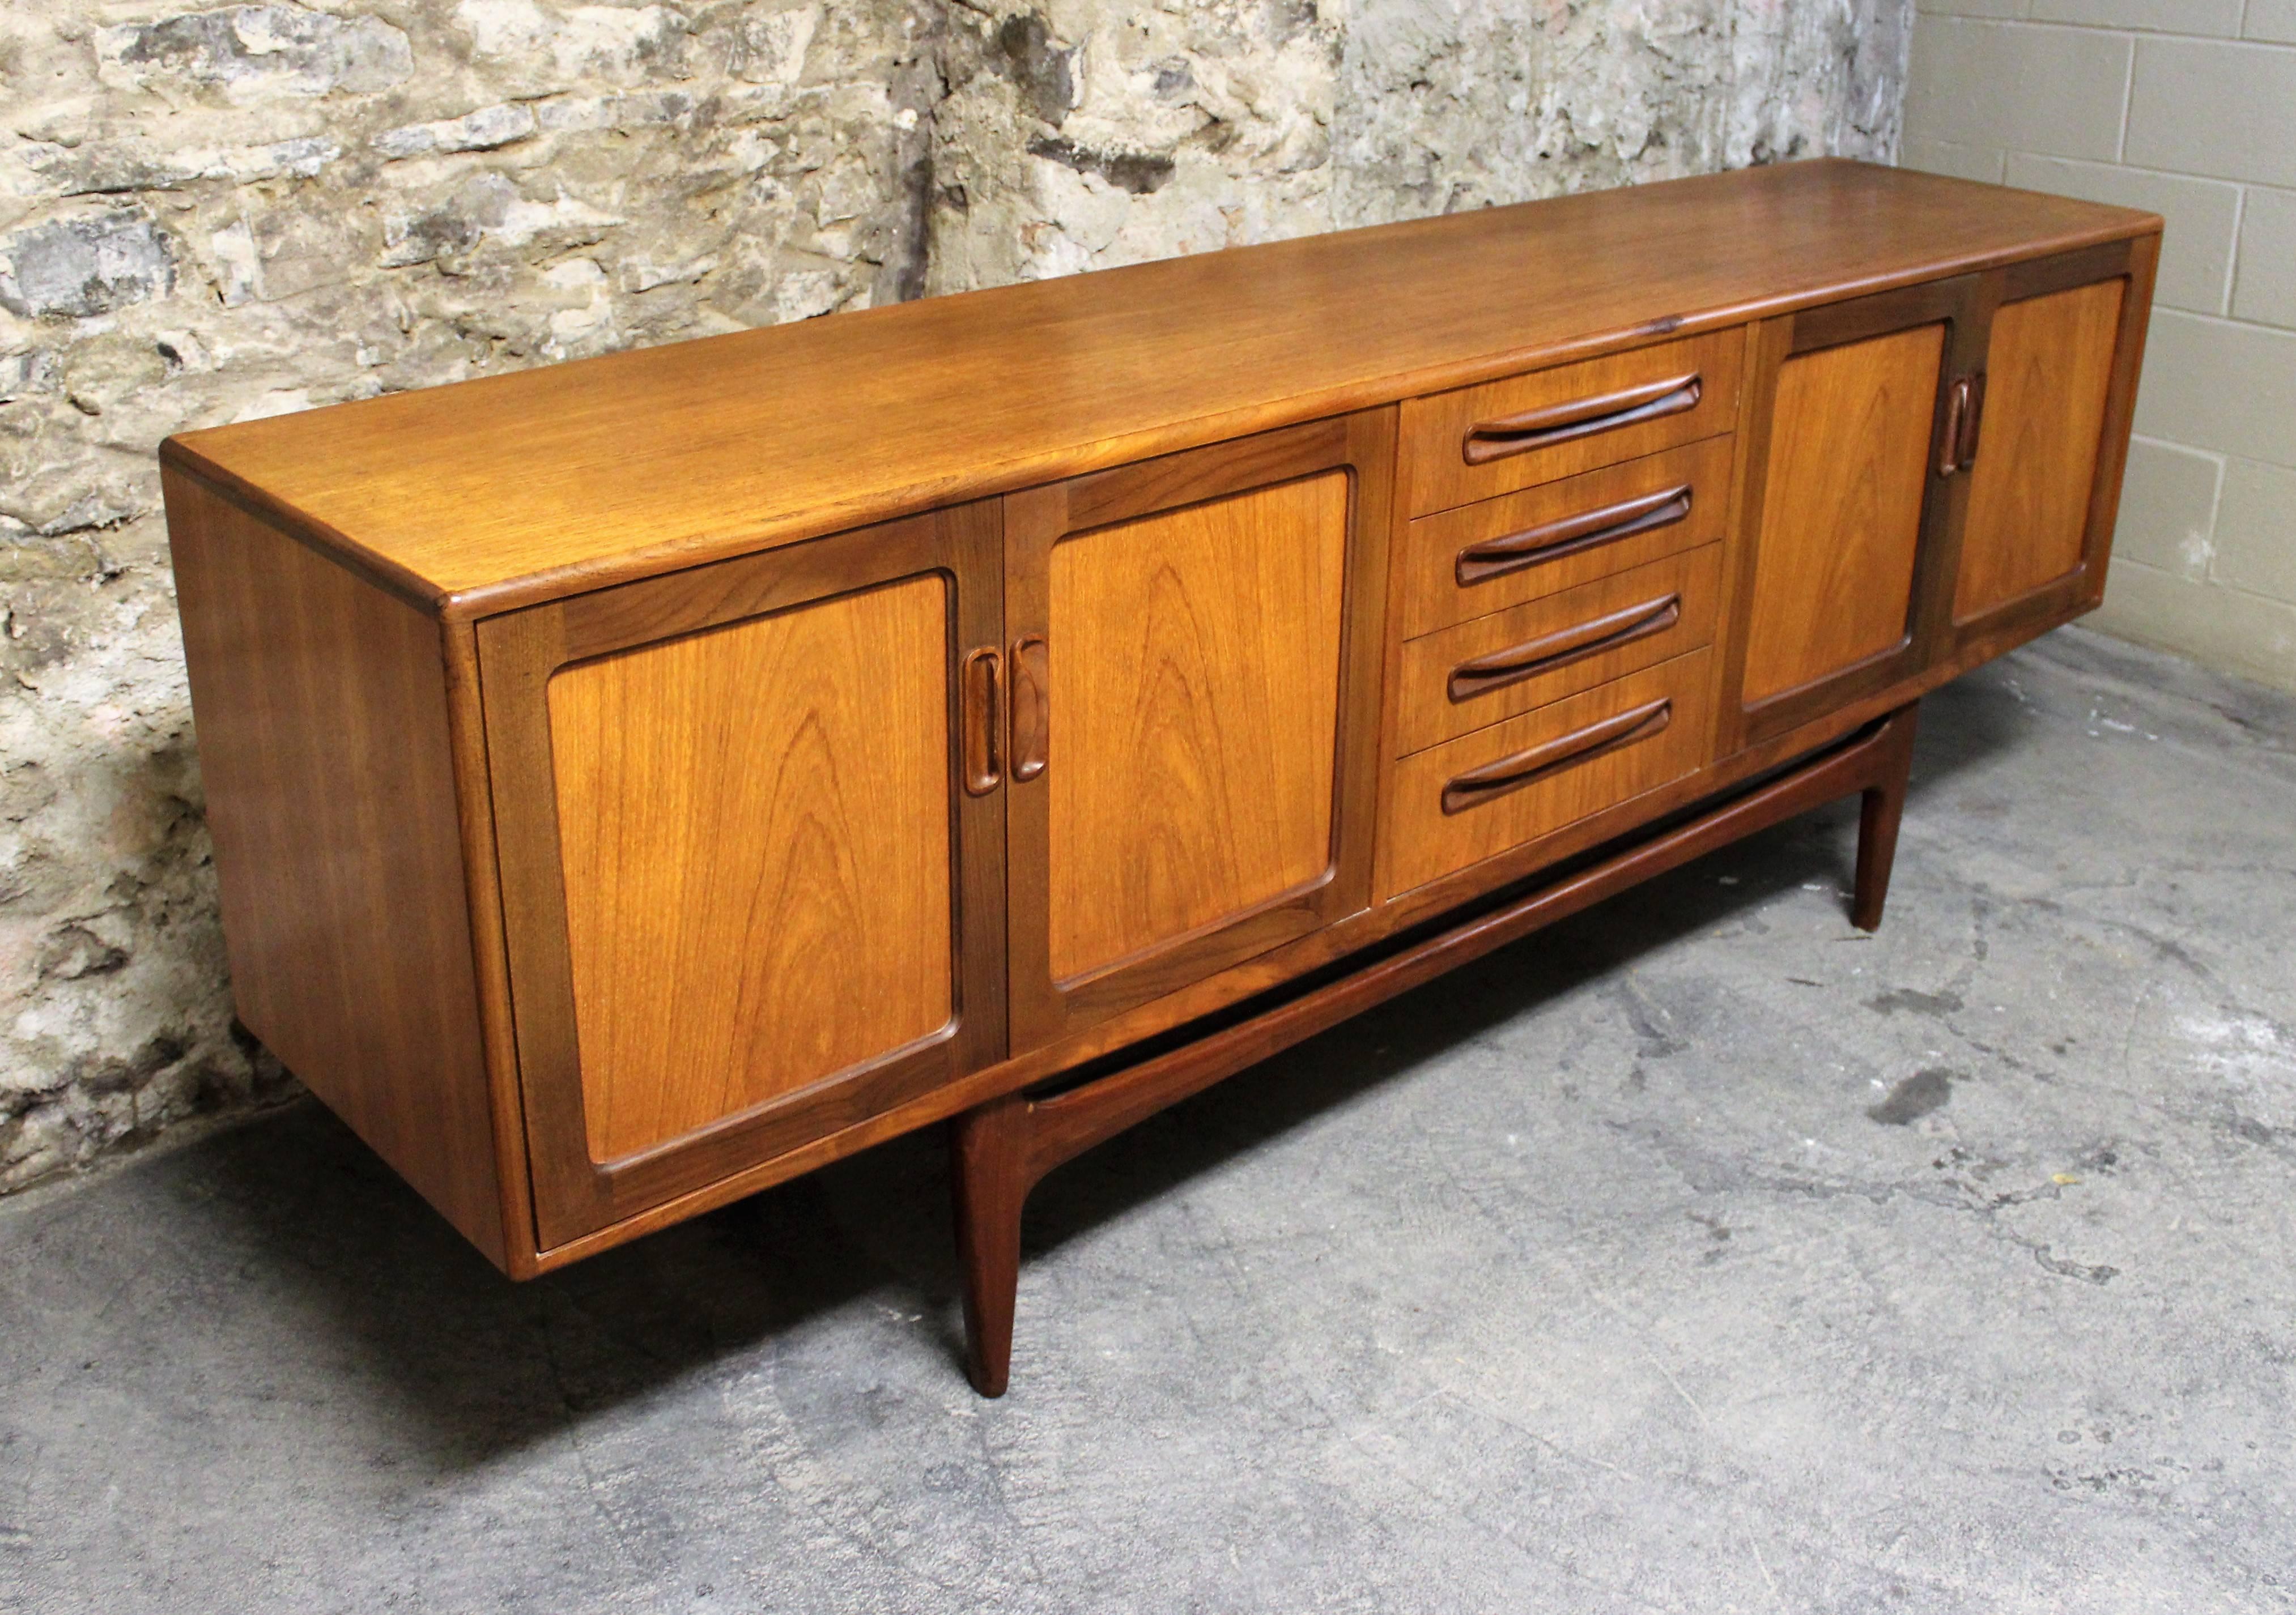 This sideboard (Model Fresco) was designed by Ib Kofod-Larsen and manufactured by G Plan. It is made from two-tone teak and features four doors and four drawers in the middle.

Scandinavian Modern / Mid-Century Modern.